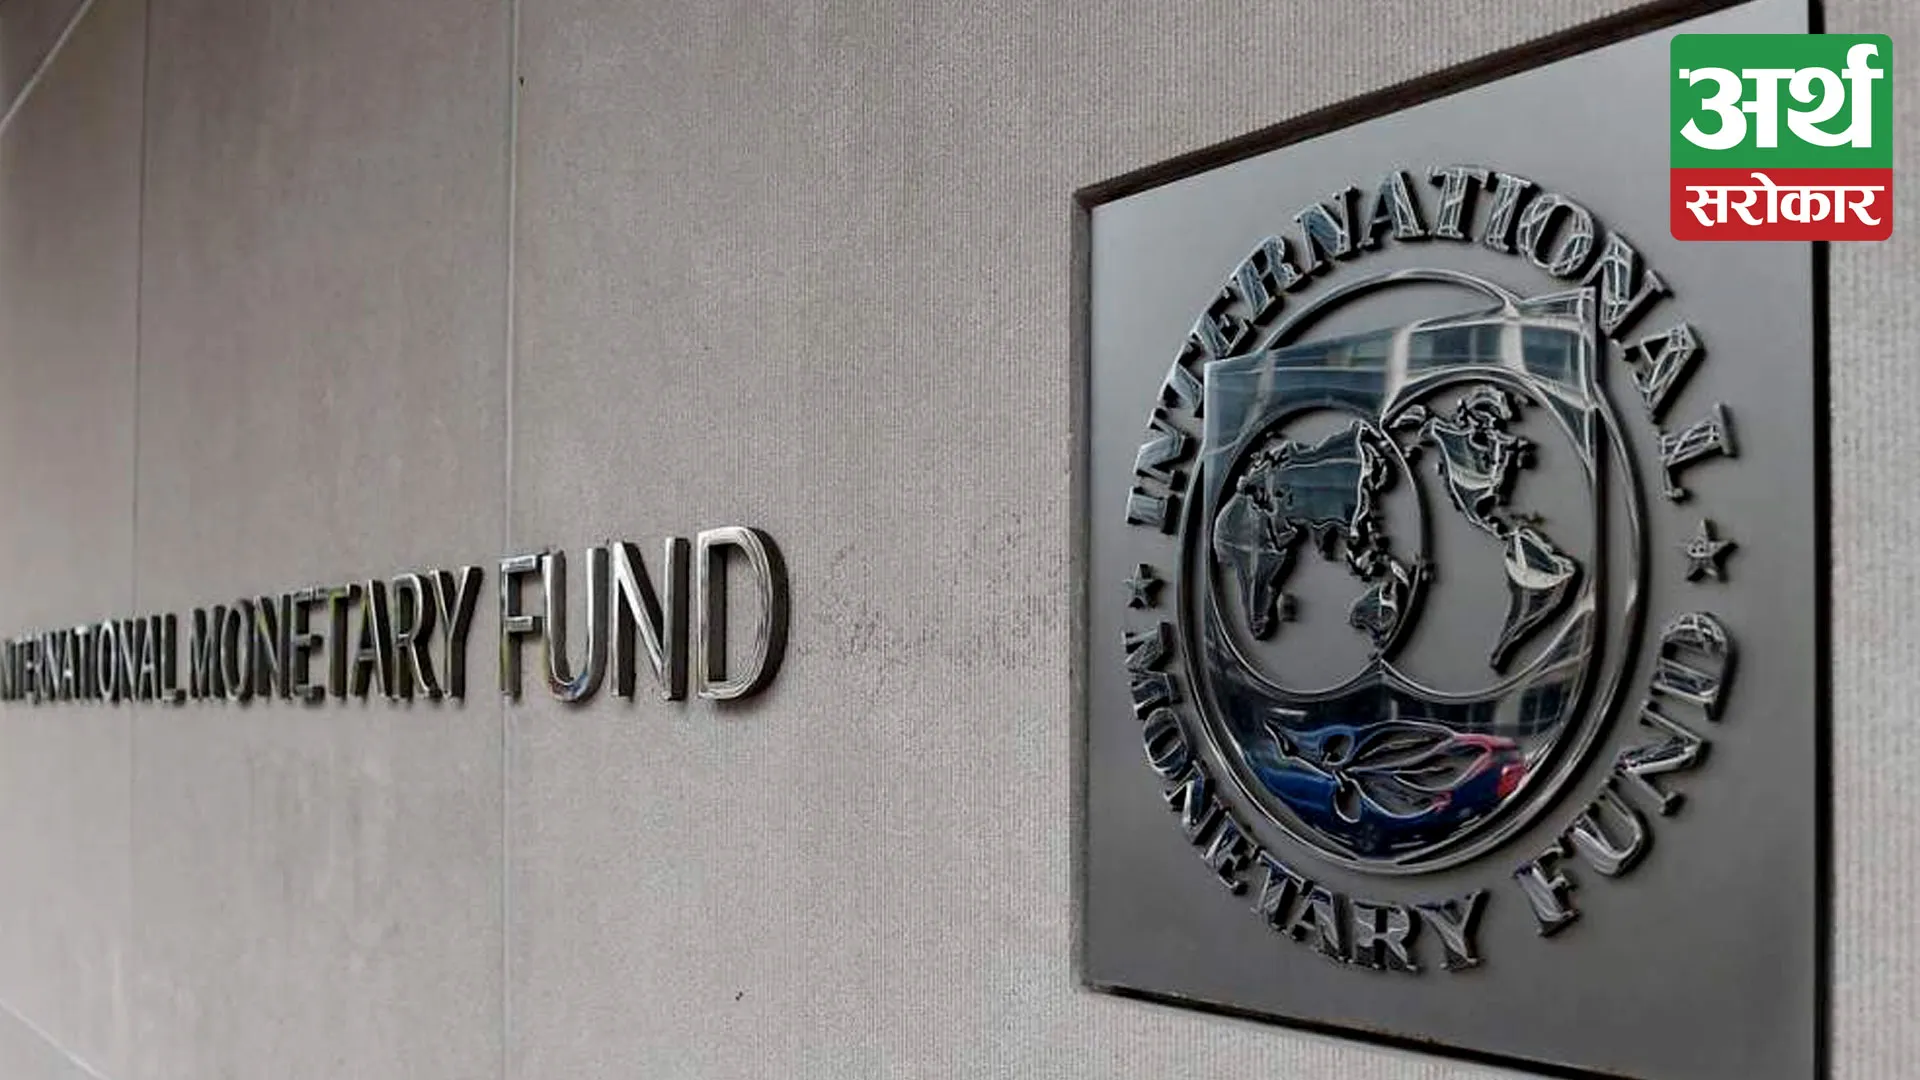 The economic crisis in Sri Lanka is commendable in terms of improvement – IMF